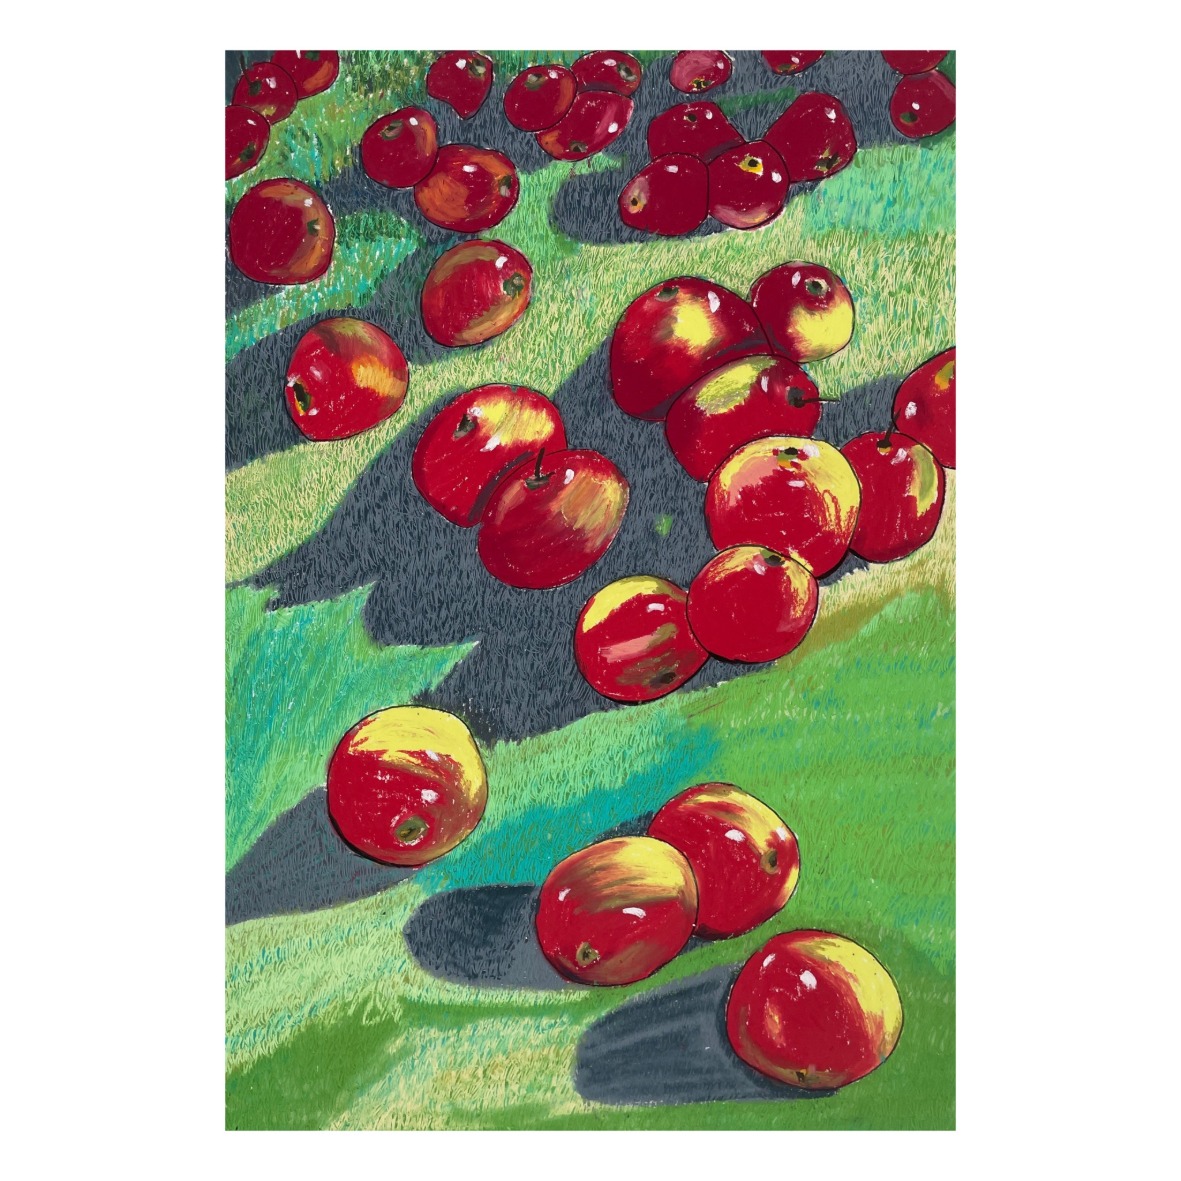 [Apples in the grass poster]